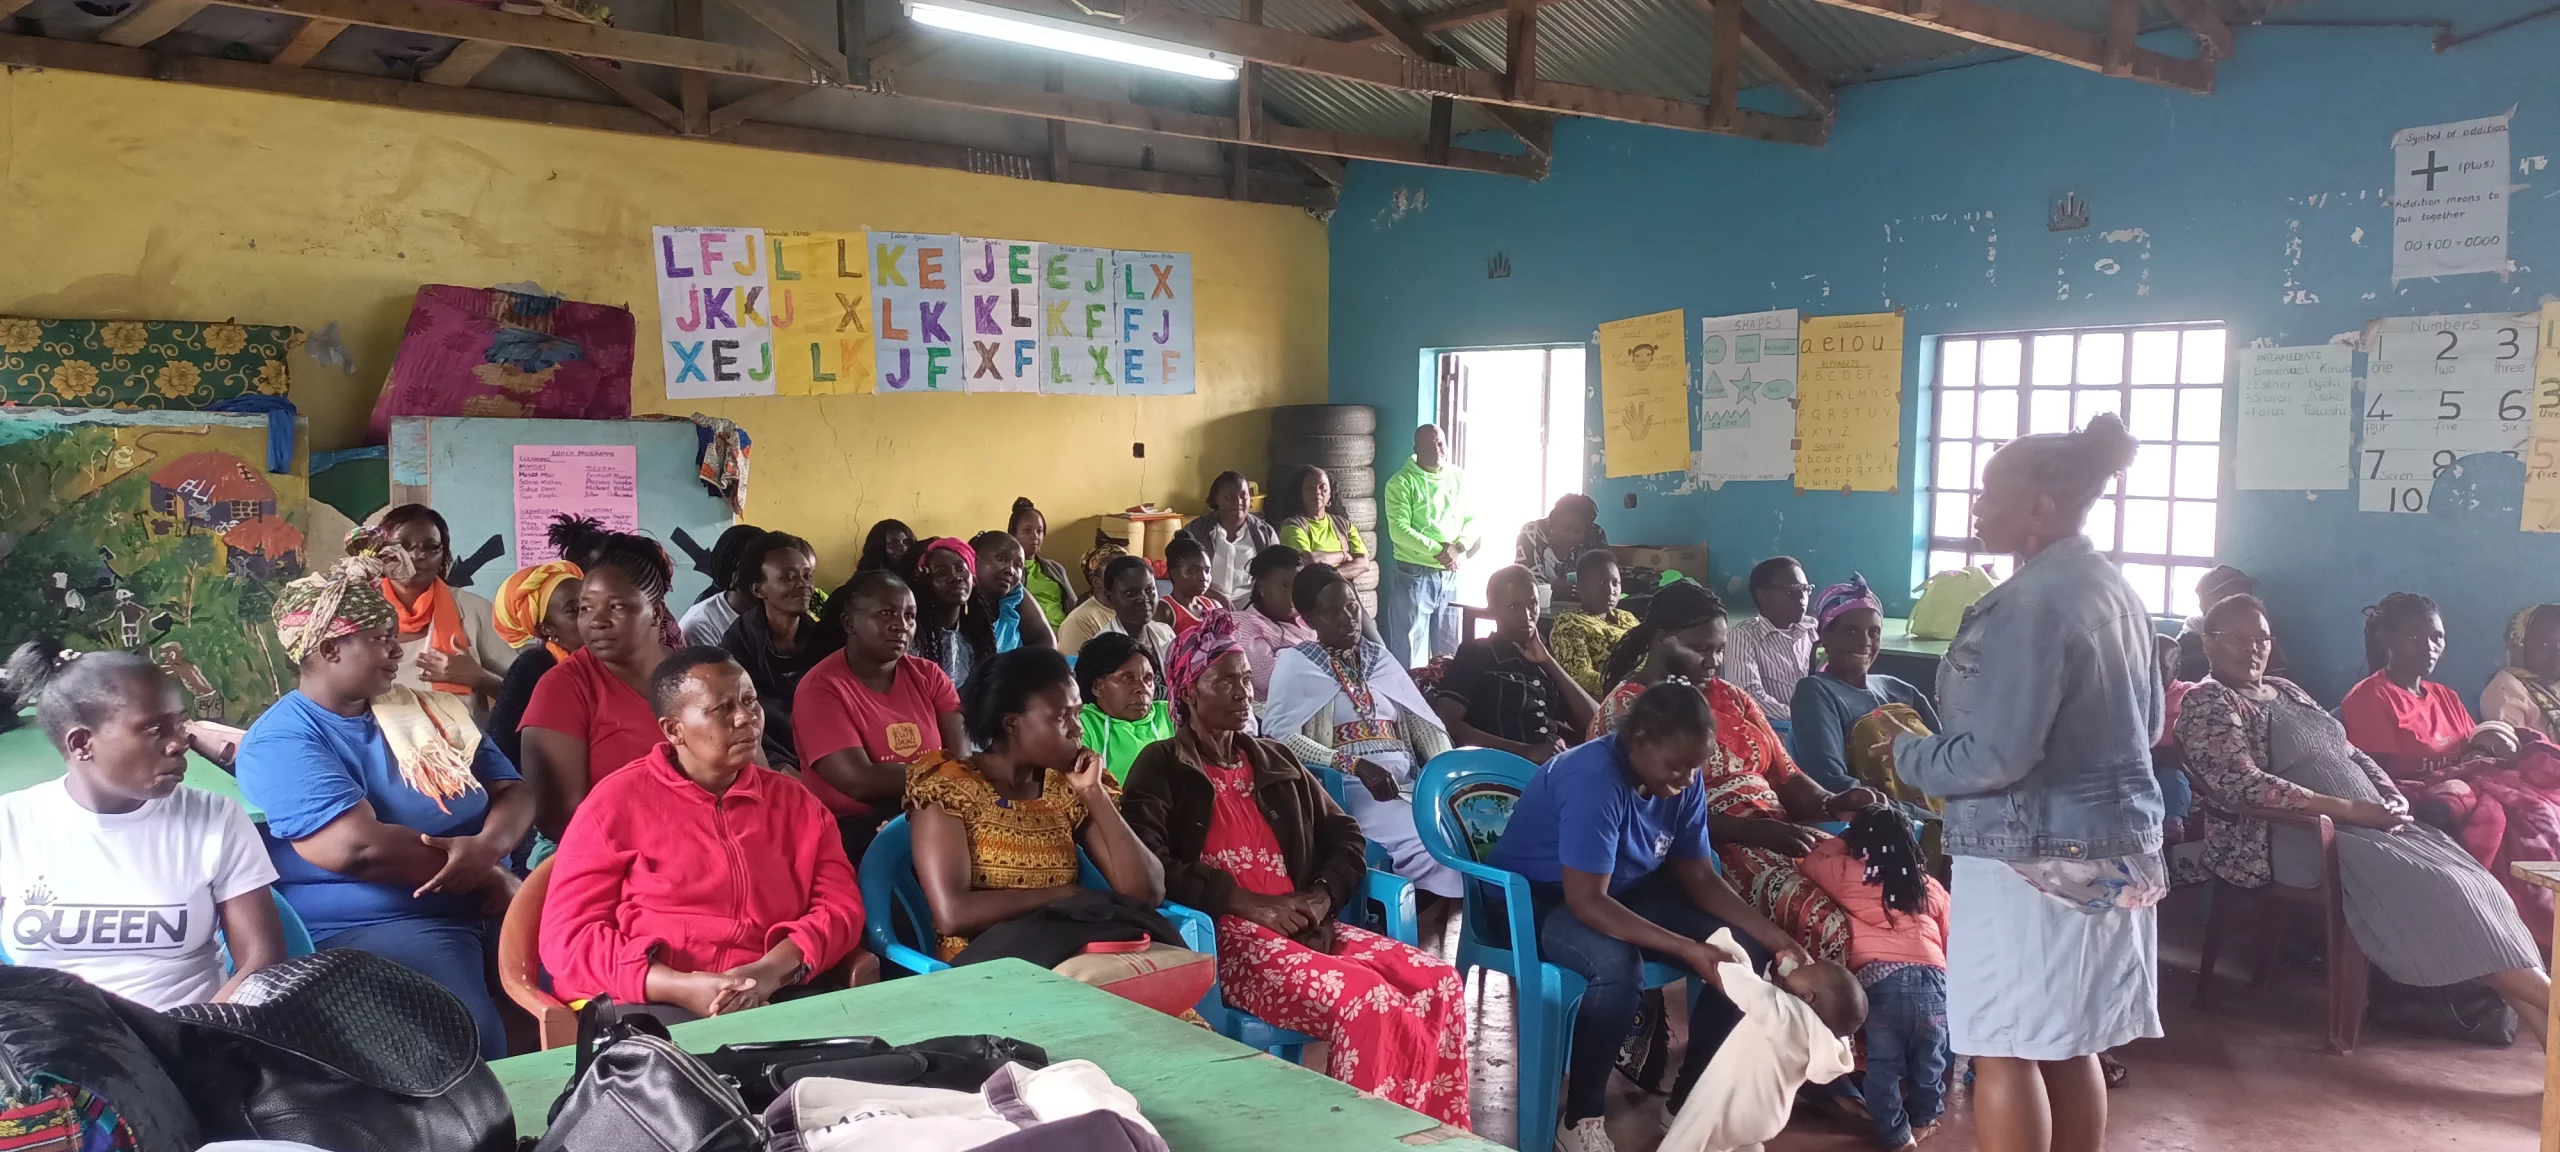 The parents had an intimate session with Scandicare field officer Ms. Evelyn, narrating their journey in raising special needs children and the stigma they encountered in the process; this was done in a safe space.